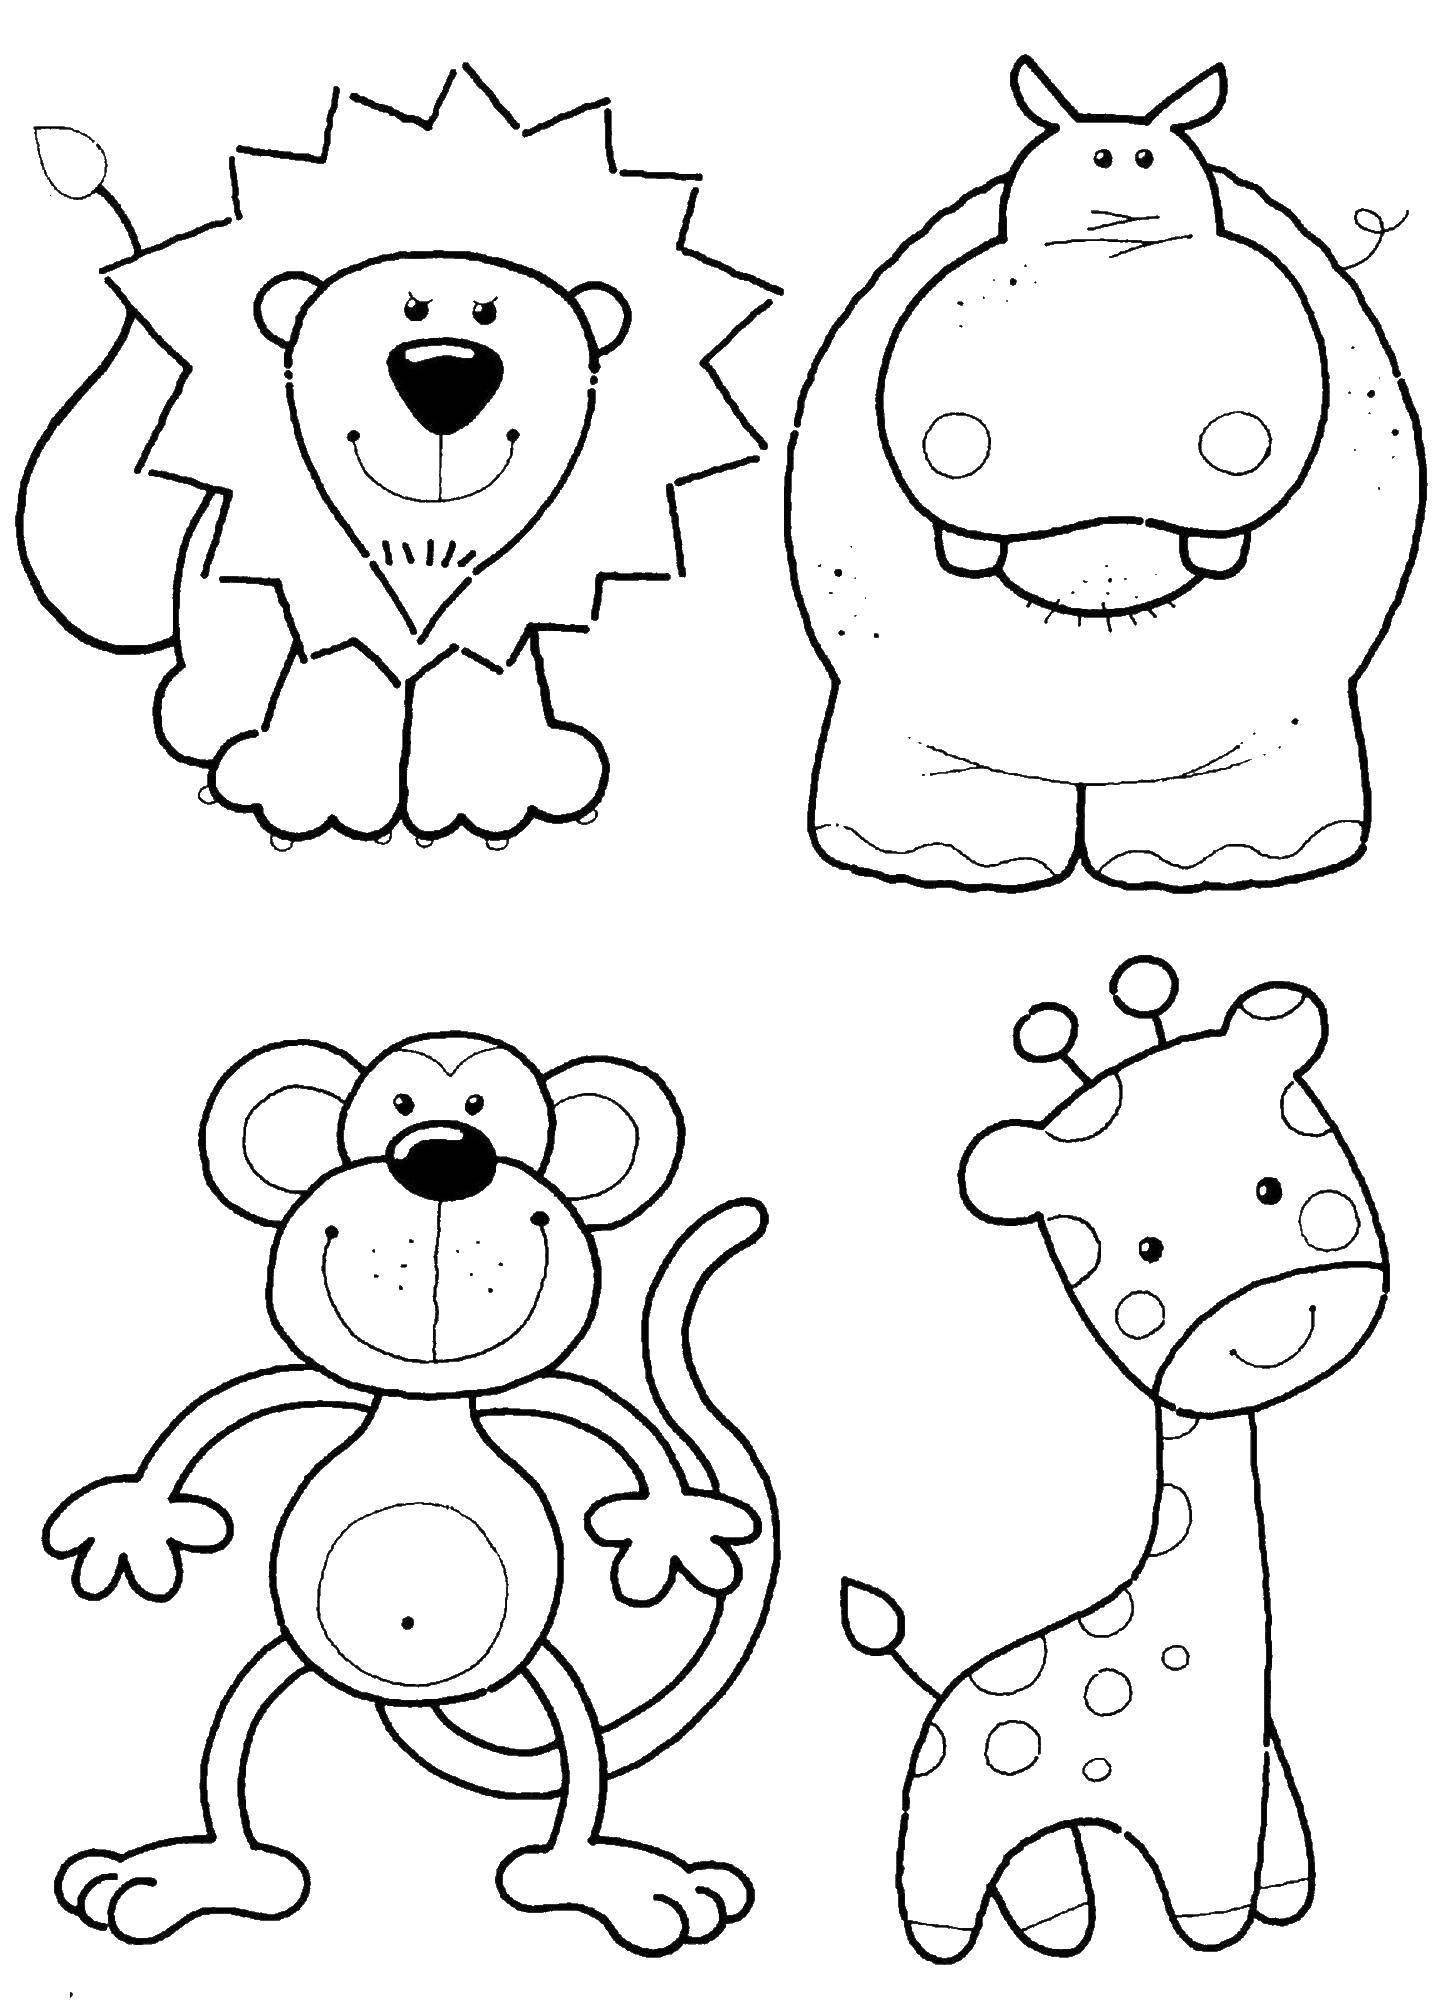 Coloring Lion, Hippo, monkey and ... ... best friends. Category Zoo. Tags:  Zoo, animals.